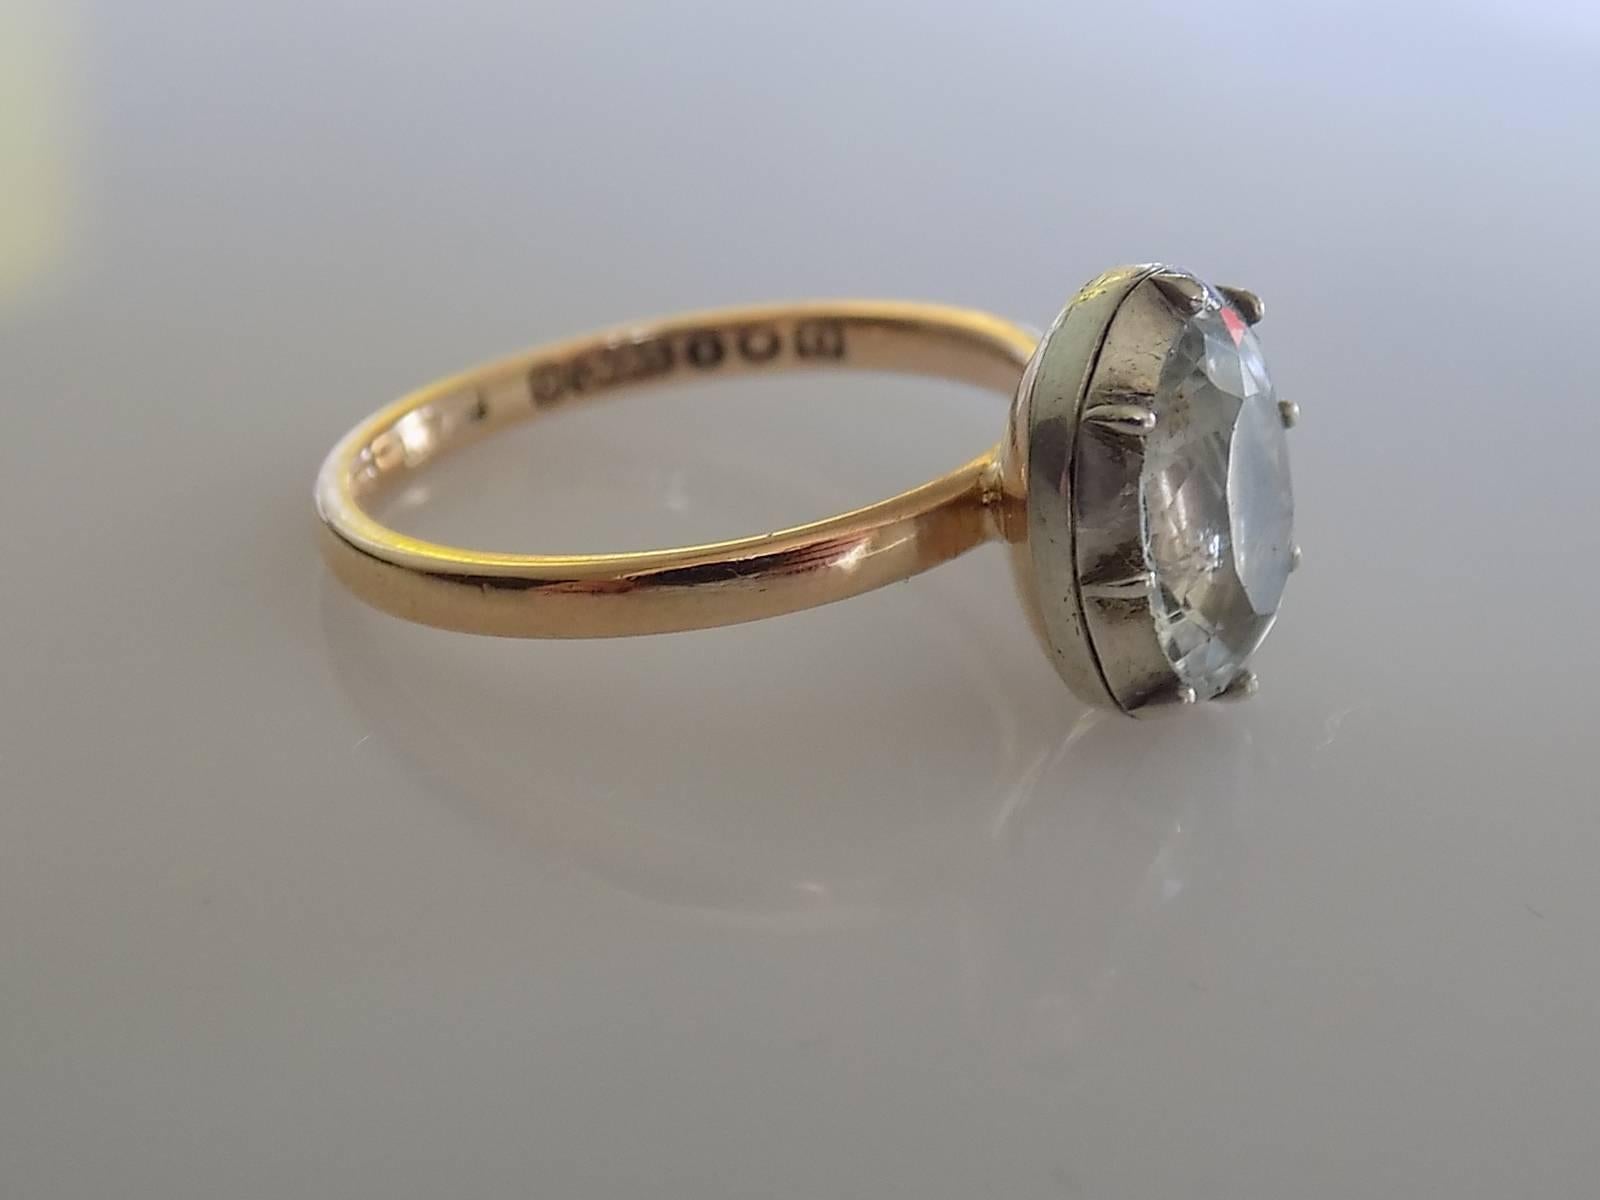 A Stunning Antique Georgian c.1800 Rock Crystal solitaire ring. Rock Crystal in a Silver topped Gold setting on a later 9 carat Gold Shank. English origin.
Size Q UK, 8.5 US can be sized.
Height of the face 12mm, Width 10mm.
Weight 3.6gr.
Full